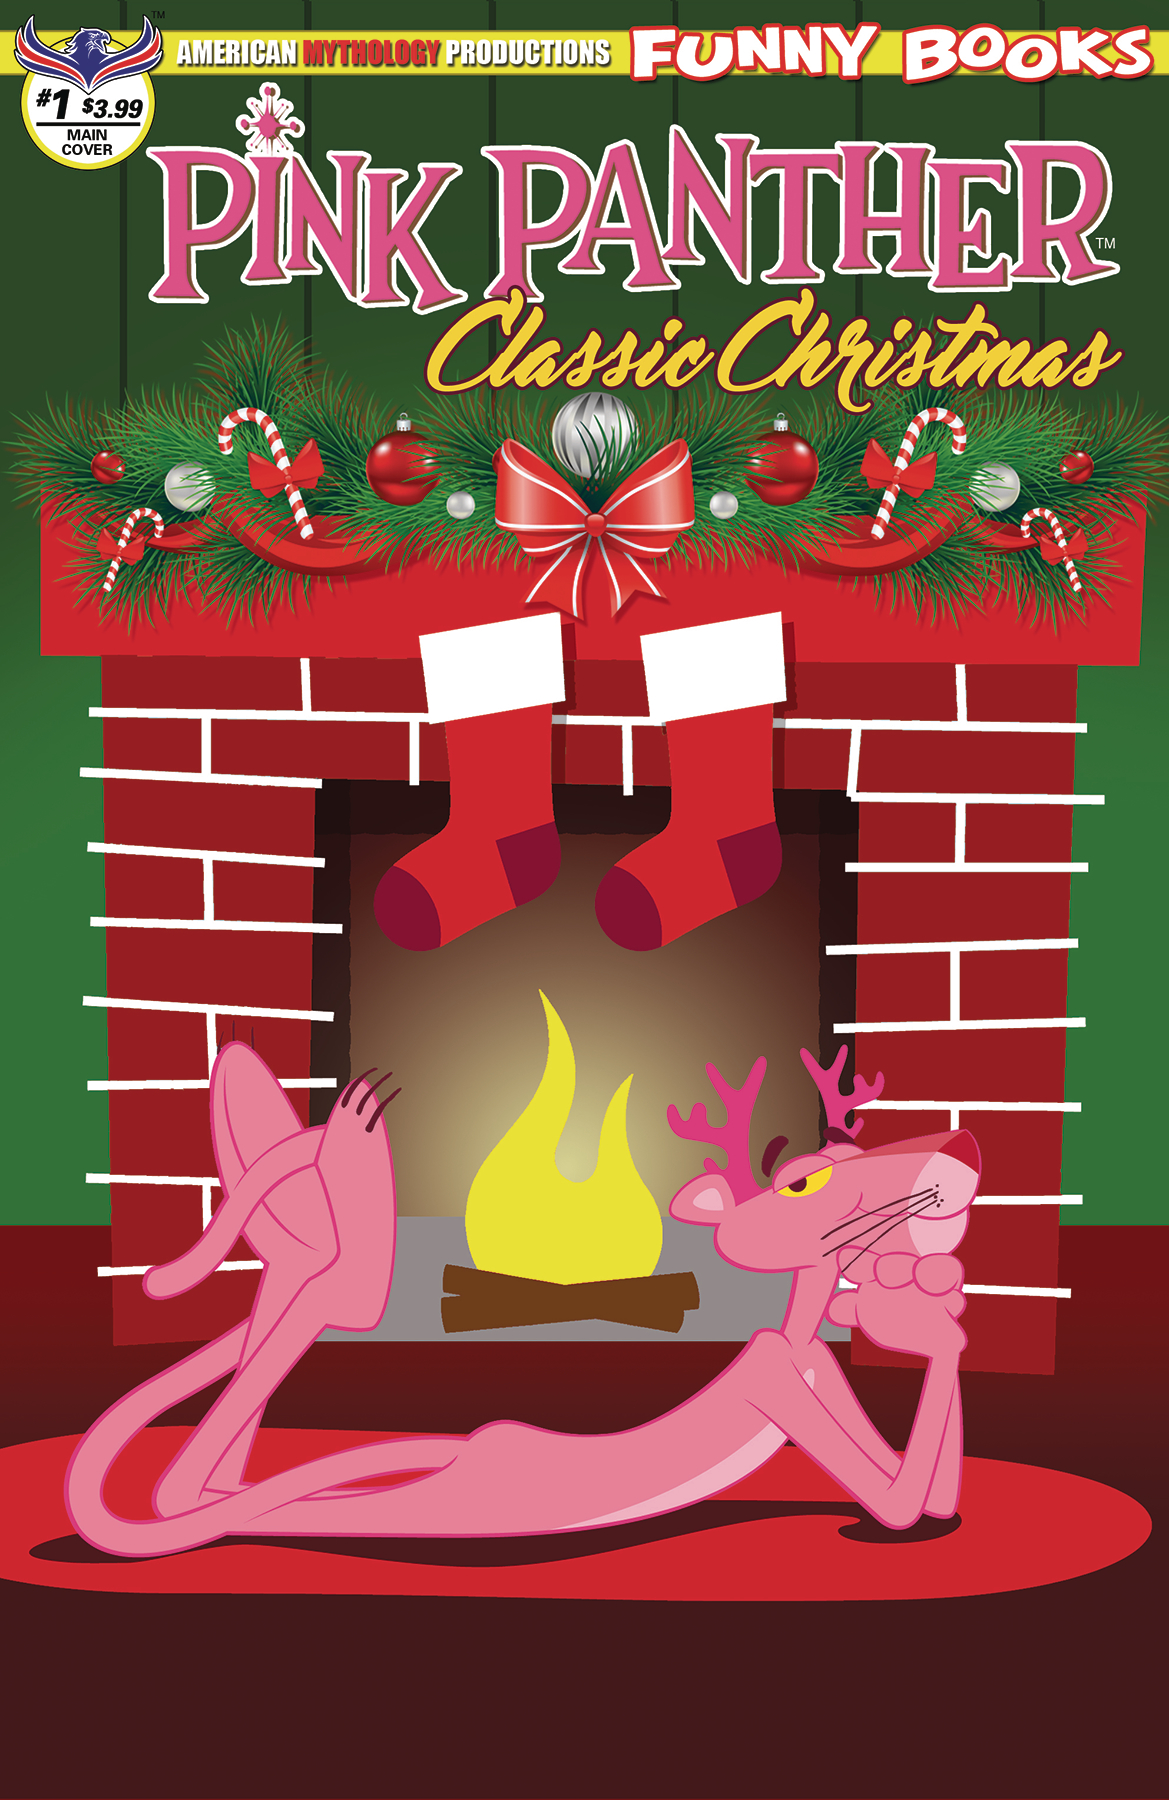 Pink Panther: Classic Christmas no. 1 (2018)